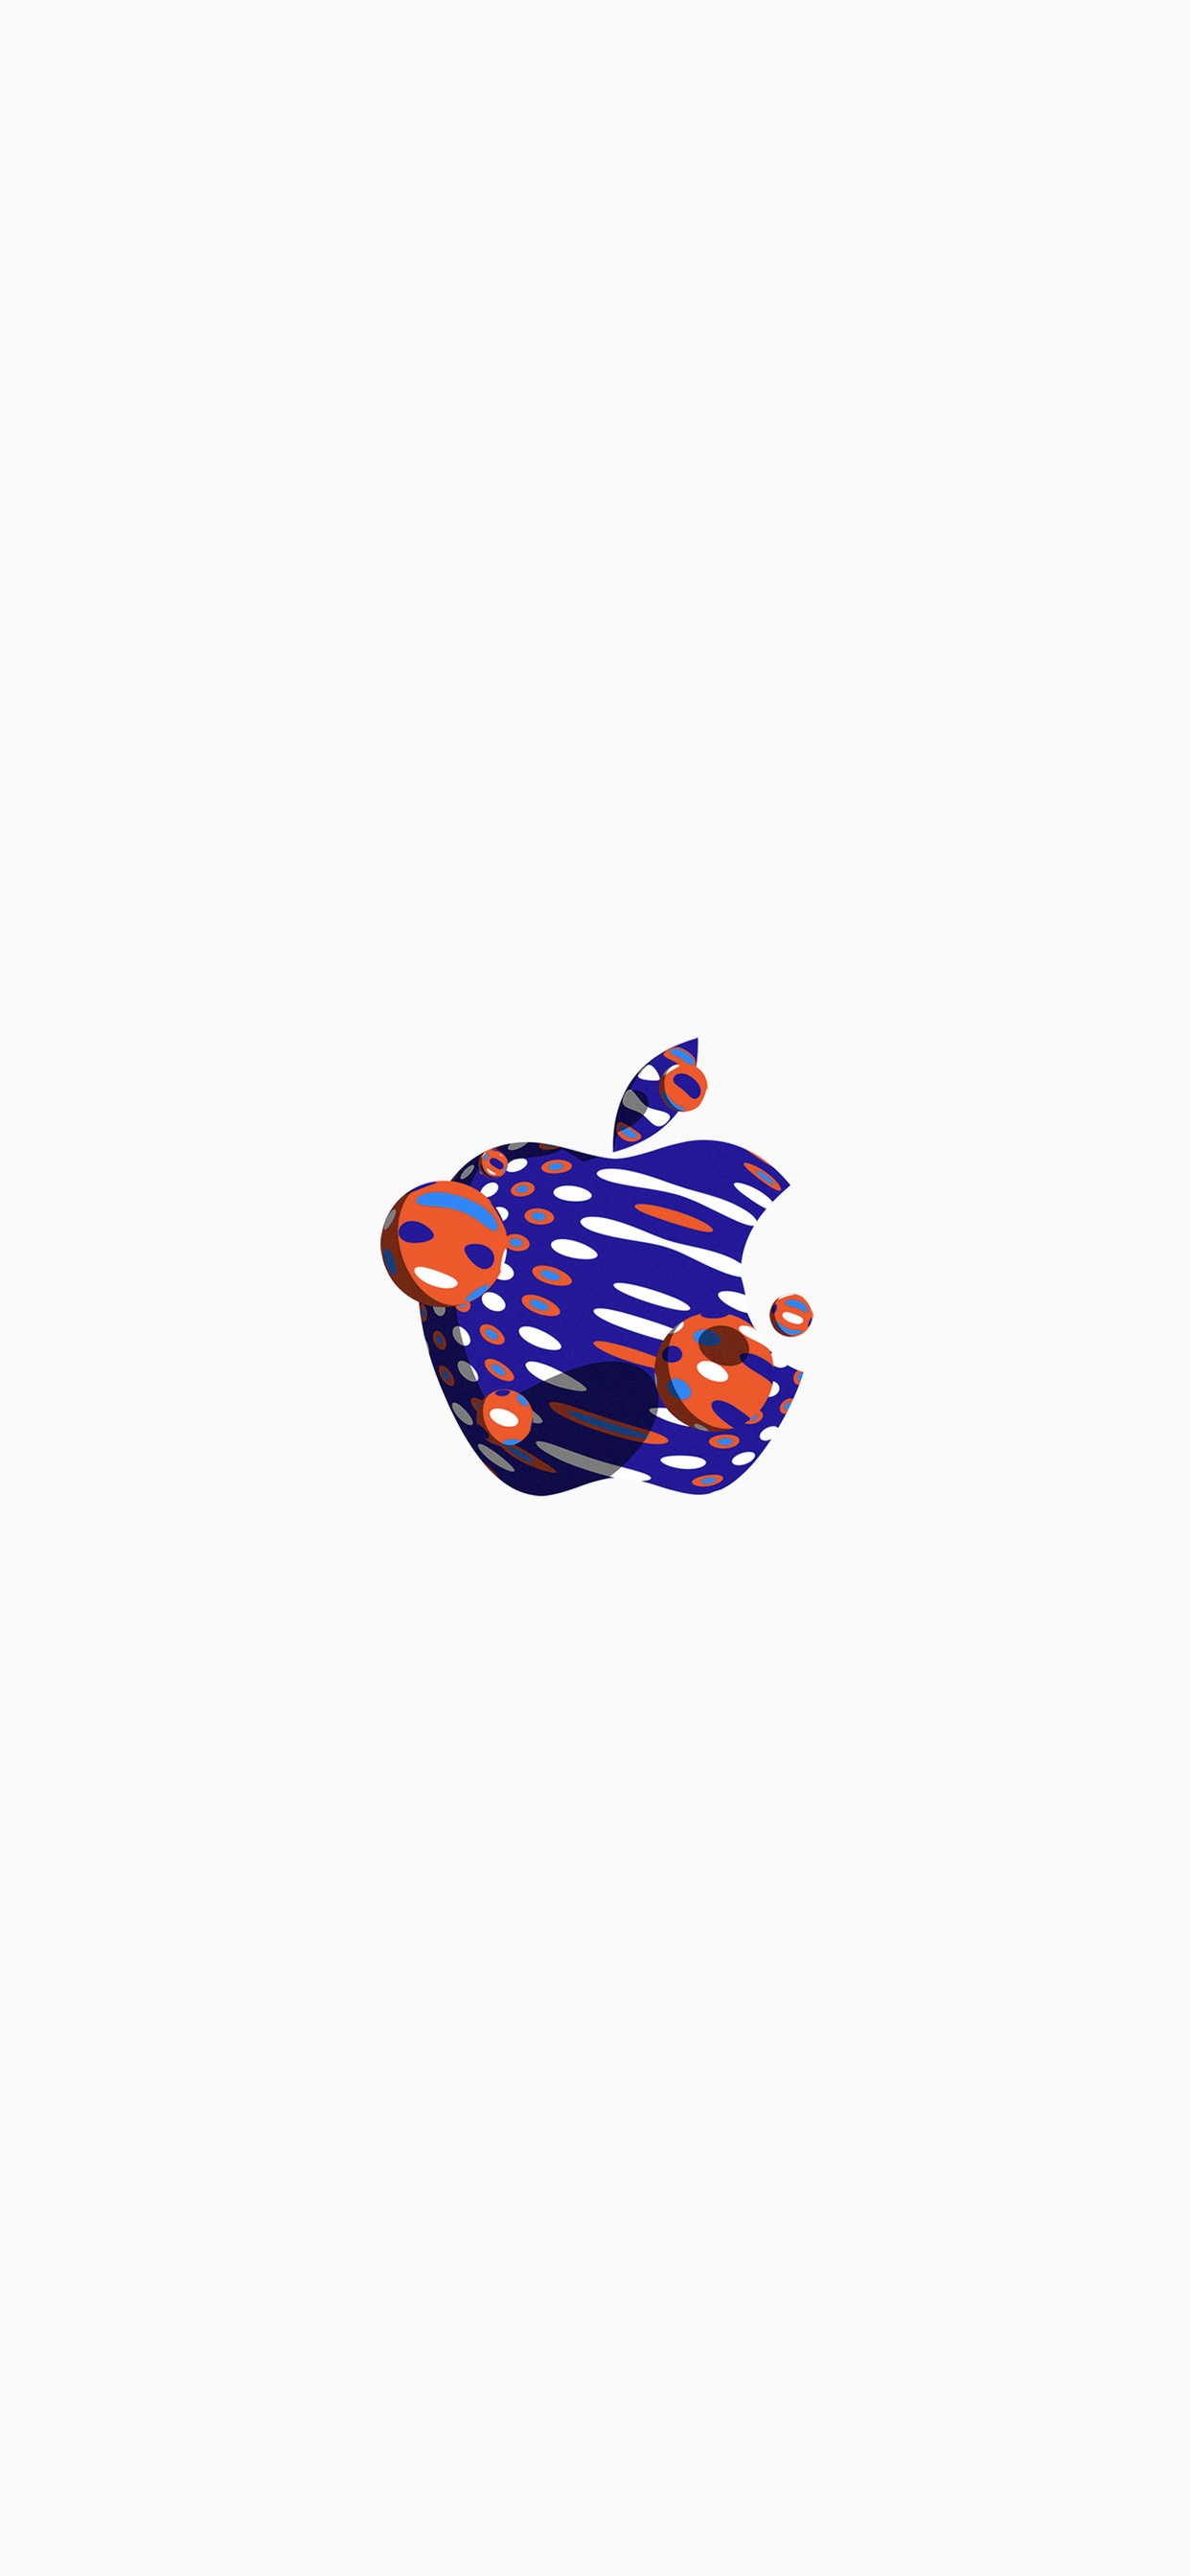 Download Apple's October 30 Event Logo Wallpapers For iPhone XS - iOS